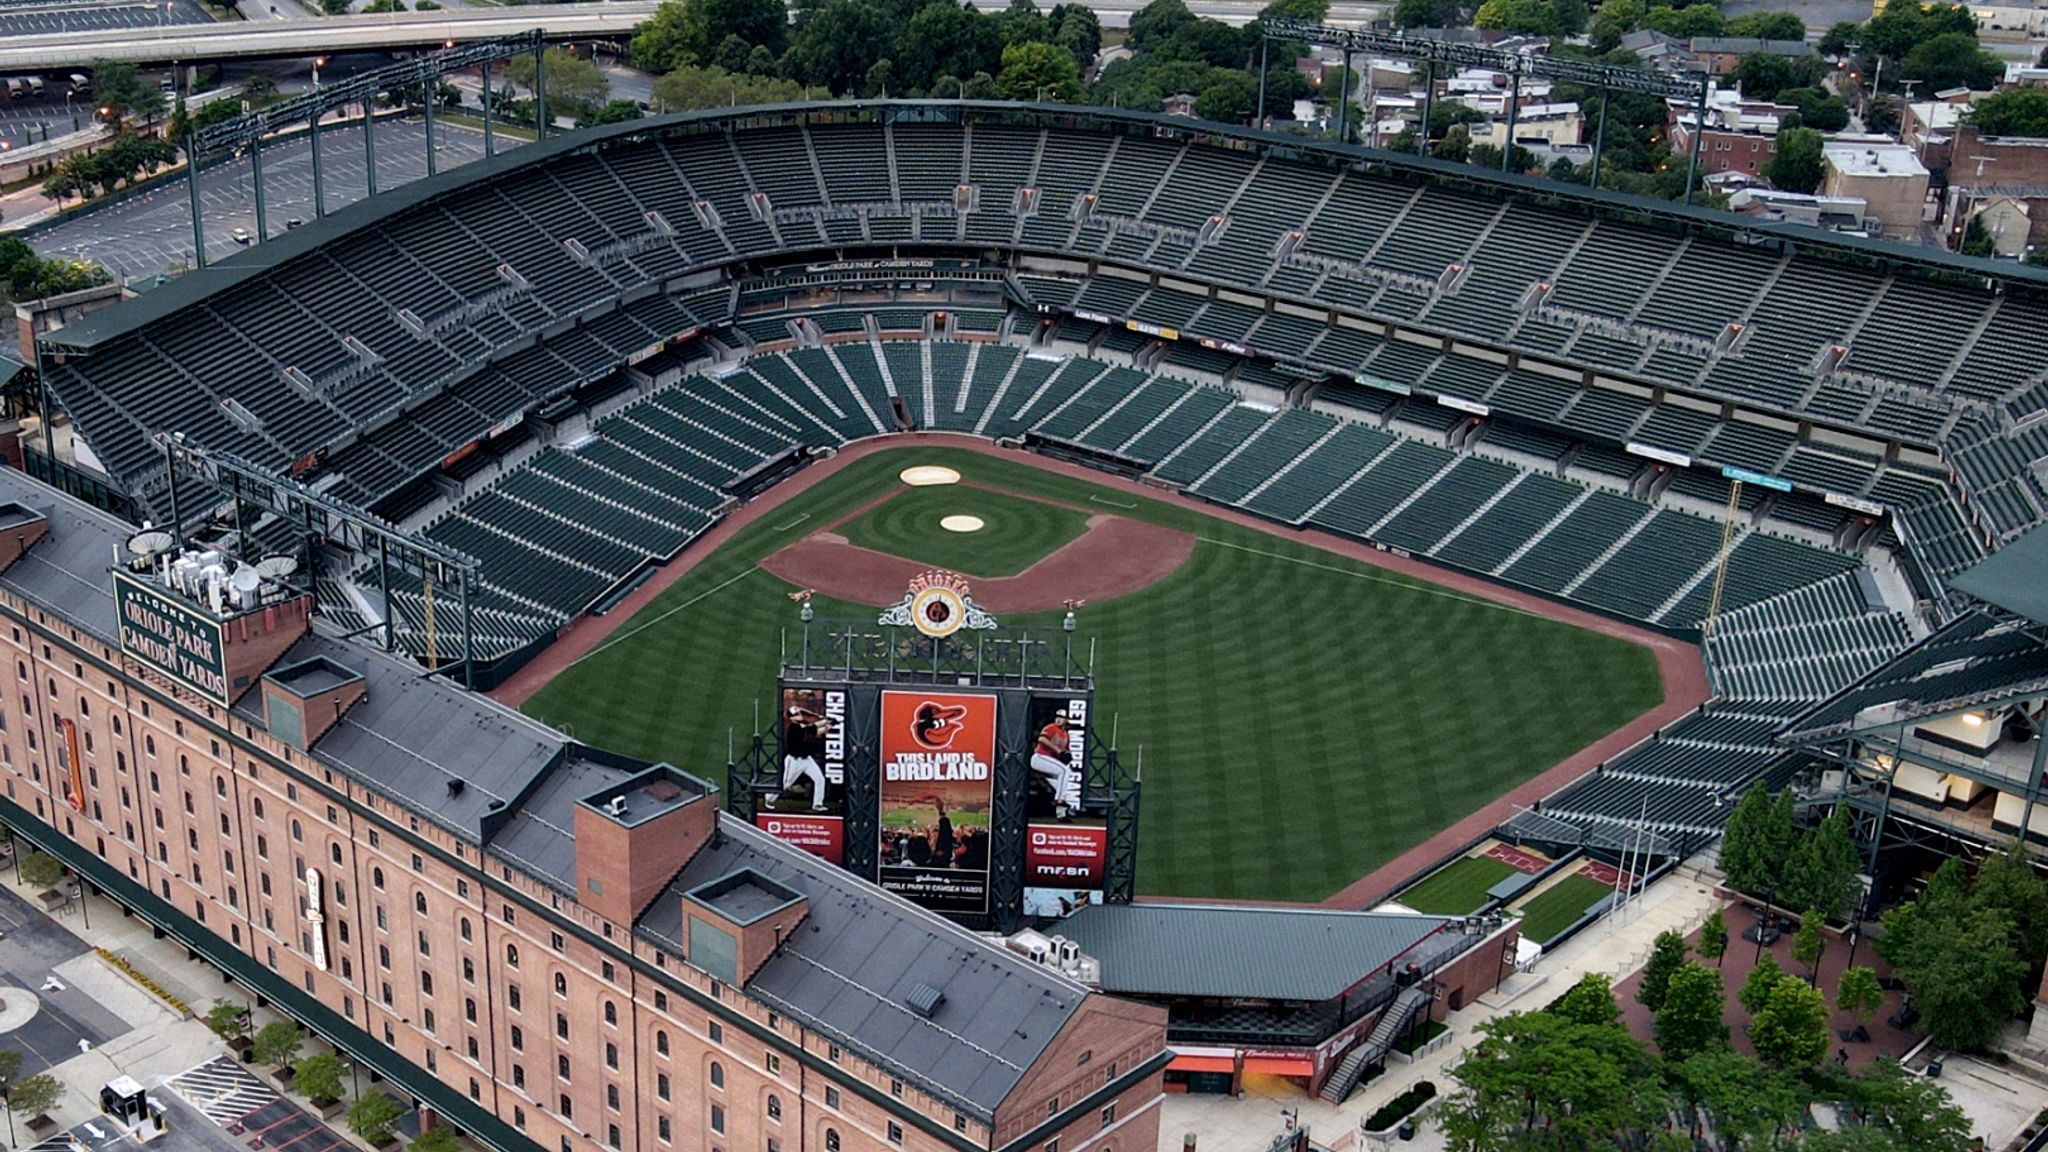 Baseball club Baltimore Orioles hire first female public address announcer  in their history, Baseball News